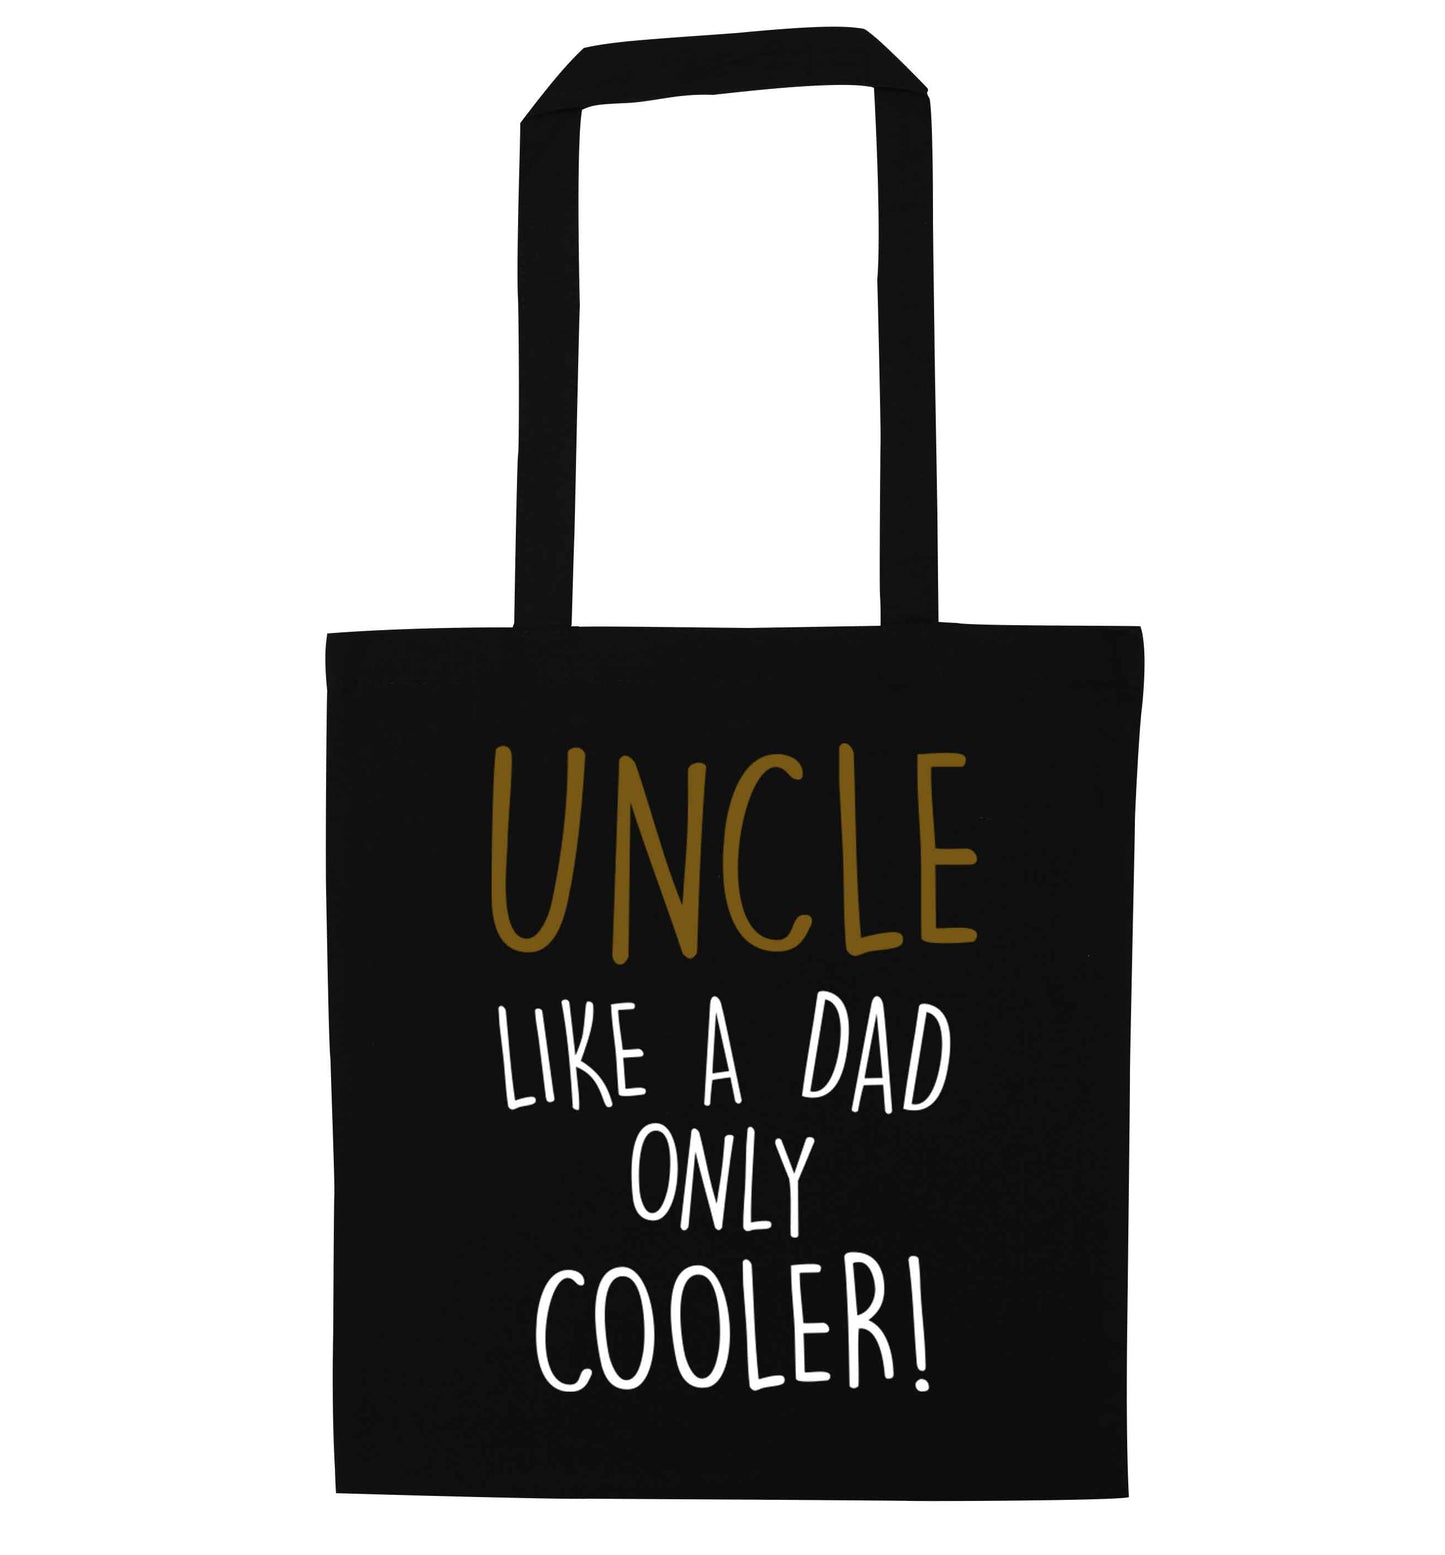 Uncle like a dad only cooler black tote bag